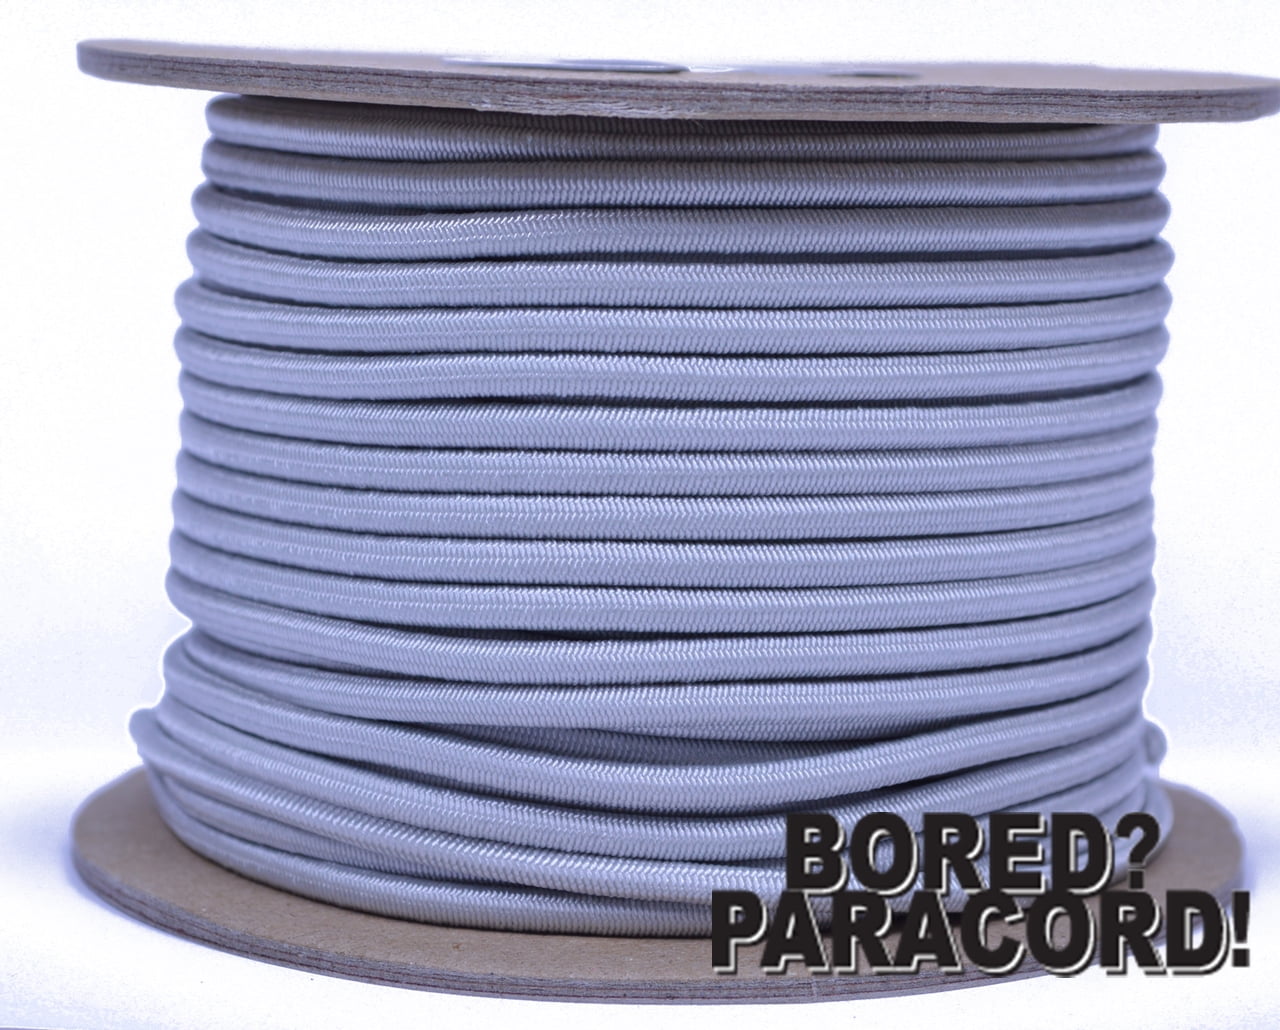 100 Feet Marine Grade Shock Bungee Cord - Multiple Colors to